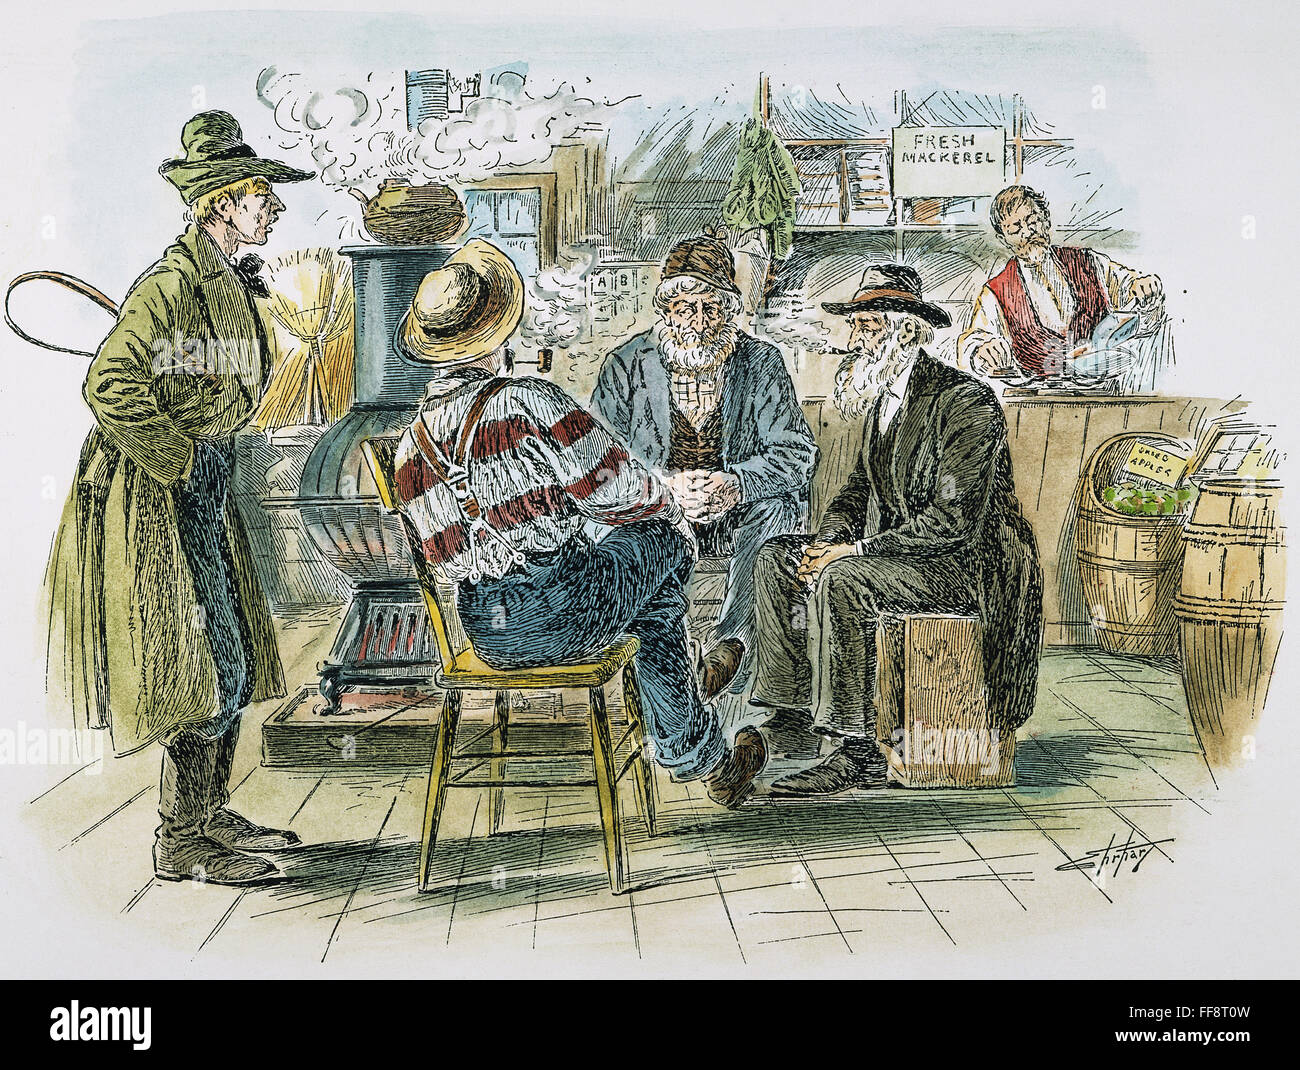 COUNTRY STORE, 1894. /nTownsfolk gathered around the woodstove of a country store. American cartoon, 1894. Stock Photo